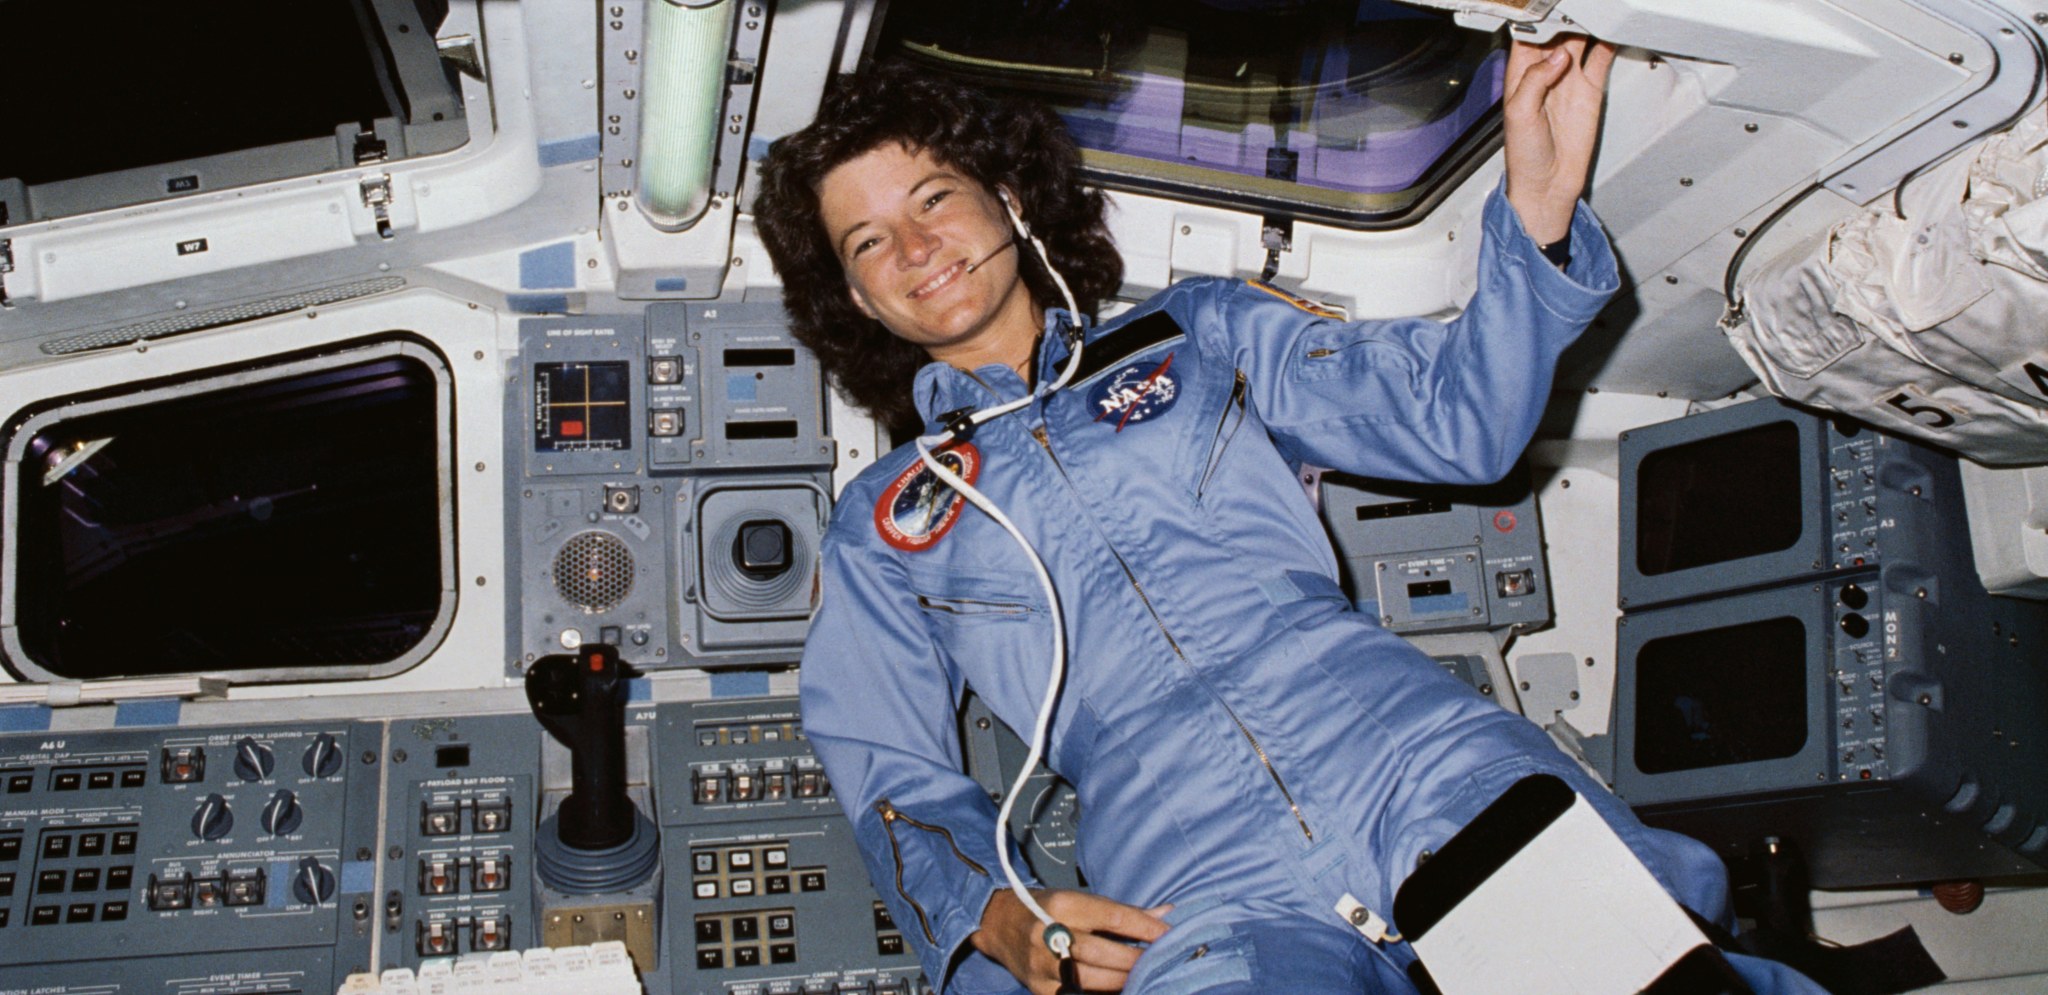 Sally Ride floats in the microgravity of low Earth orbit on the orbiter Challenger in 1983